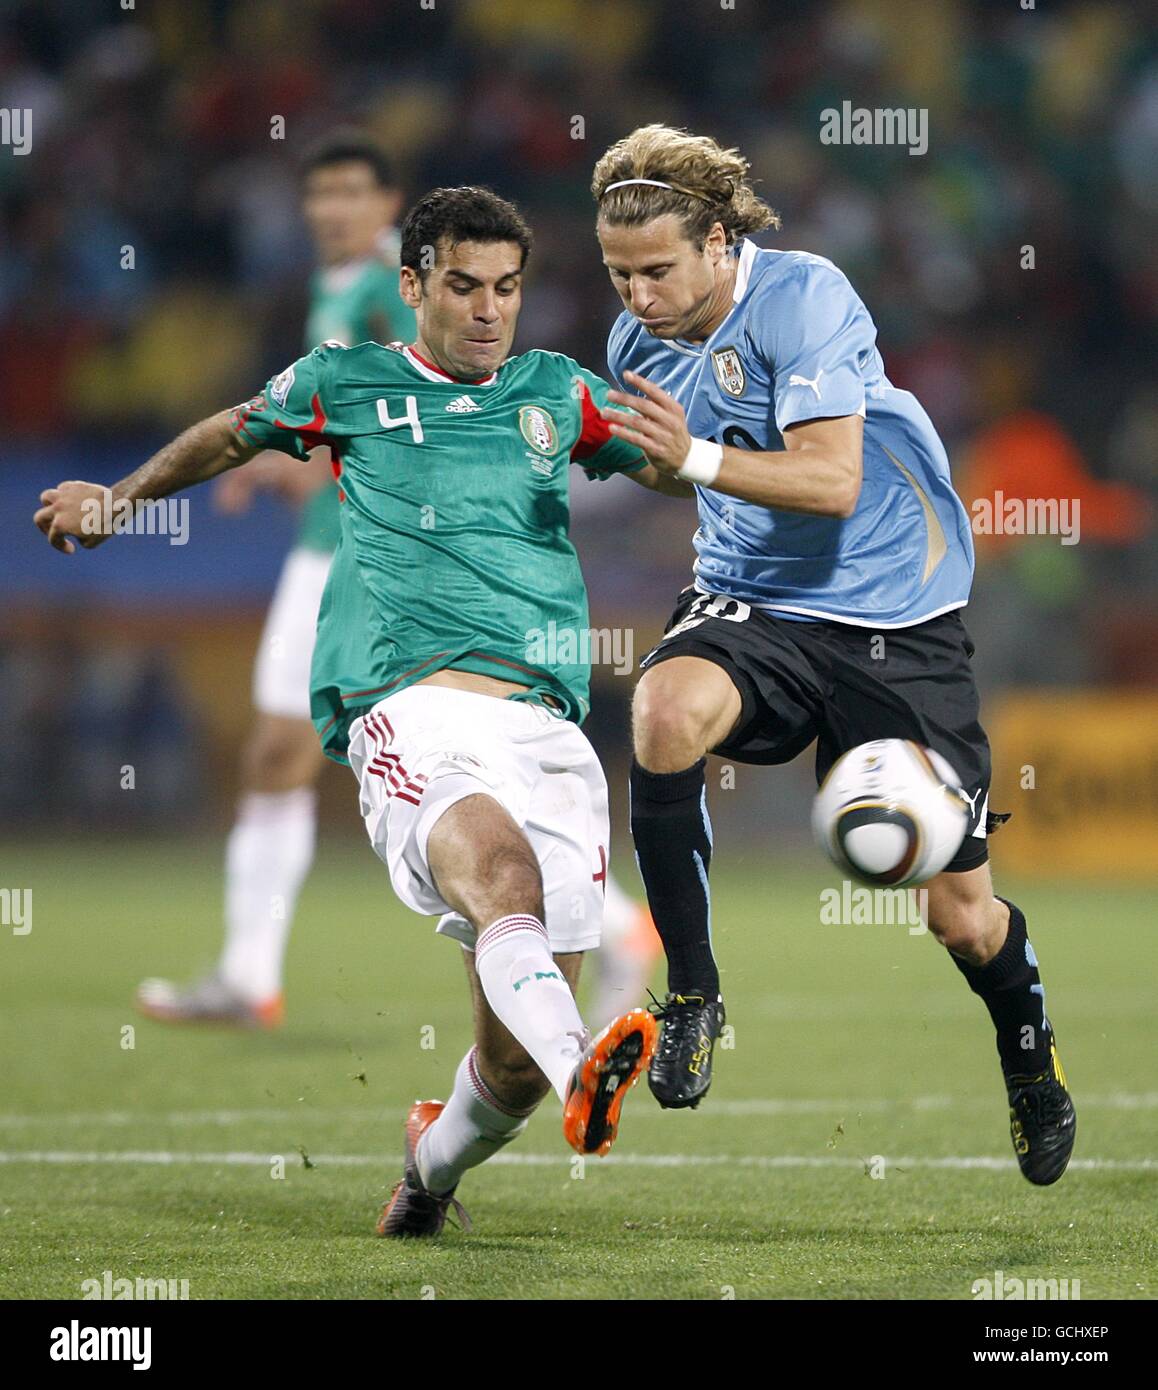 Soccer - 2010 FIFA World Cup South Africa - Group A - Mexico v Uruguay - Royal Bafokeng Stadium. Mexico's Rafael Marquez (left) and Uruguay's Diego Forlan battle for the ball Stock Photo